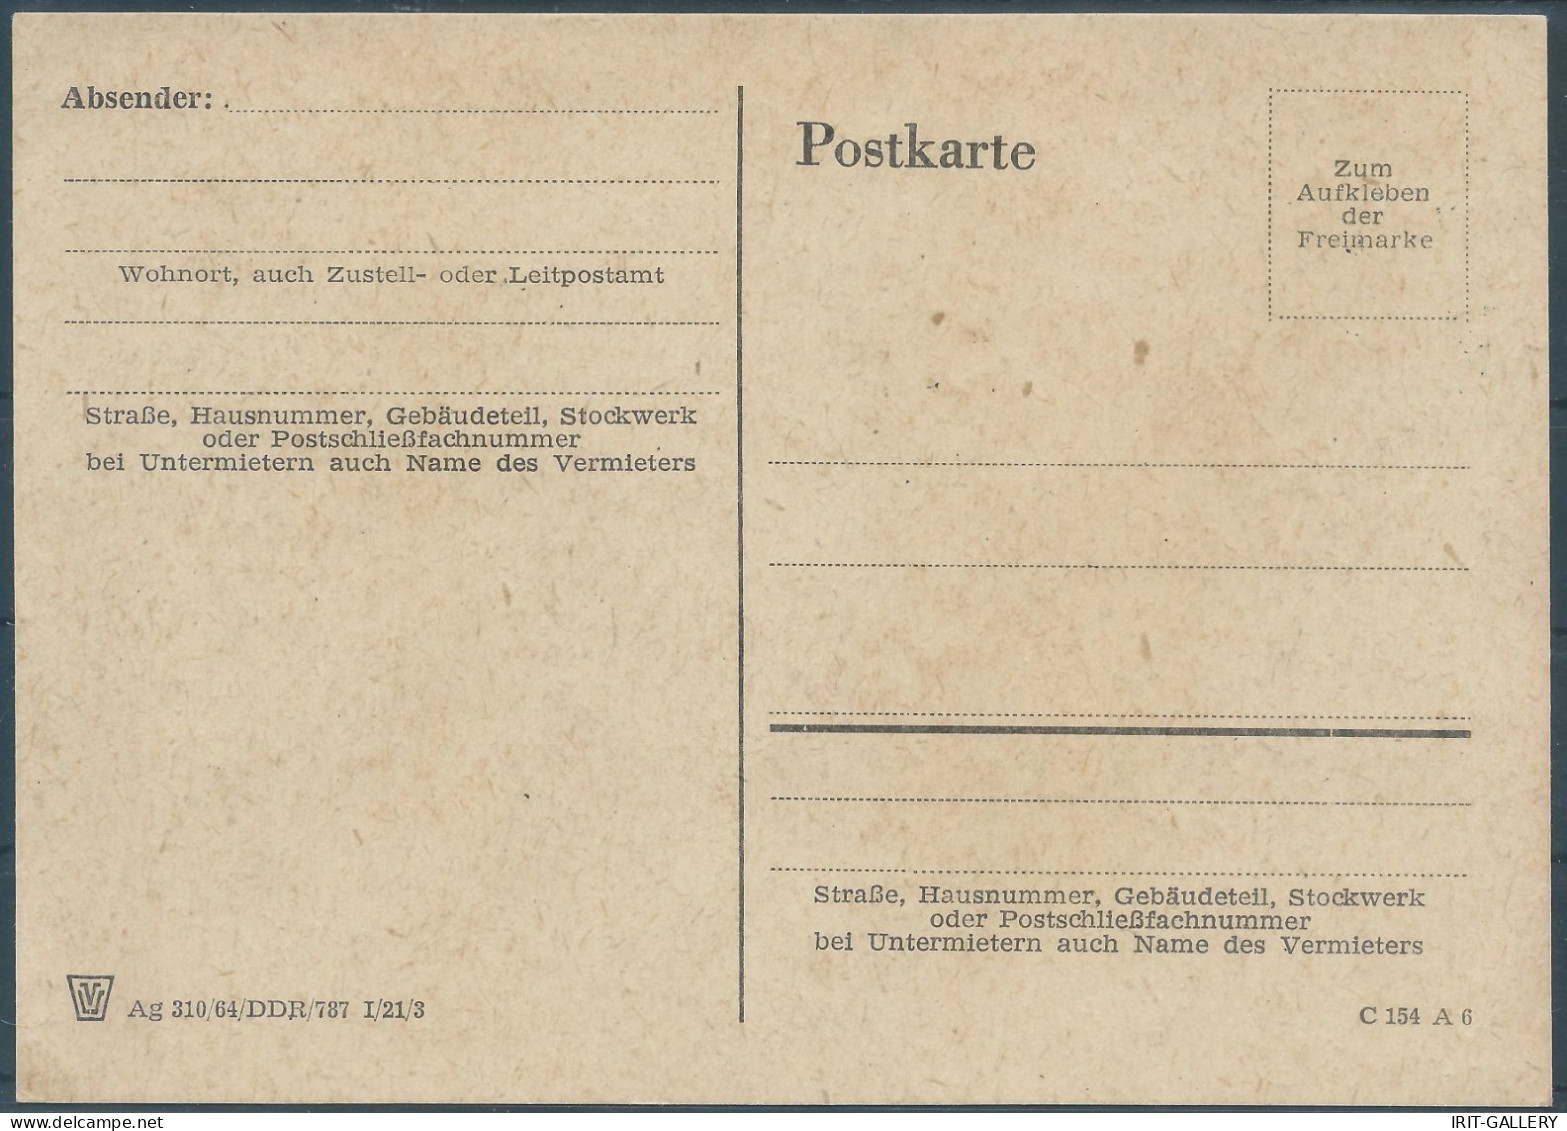 Germany-Deutschland,Democratic Republic,1964 Olympic Games-Tokyo,Japan-Postal Card With Cancellation On The Day Of Issue - Postkaarten - Ongebruikt